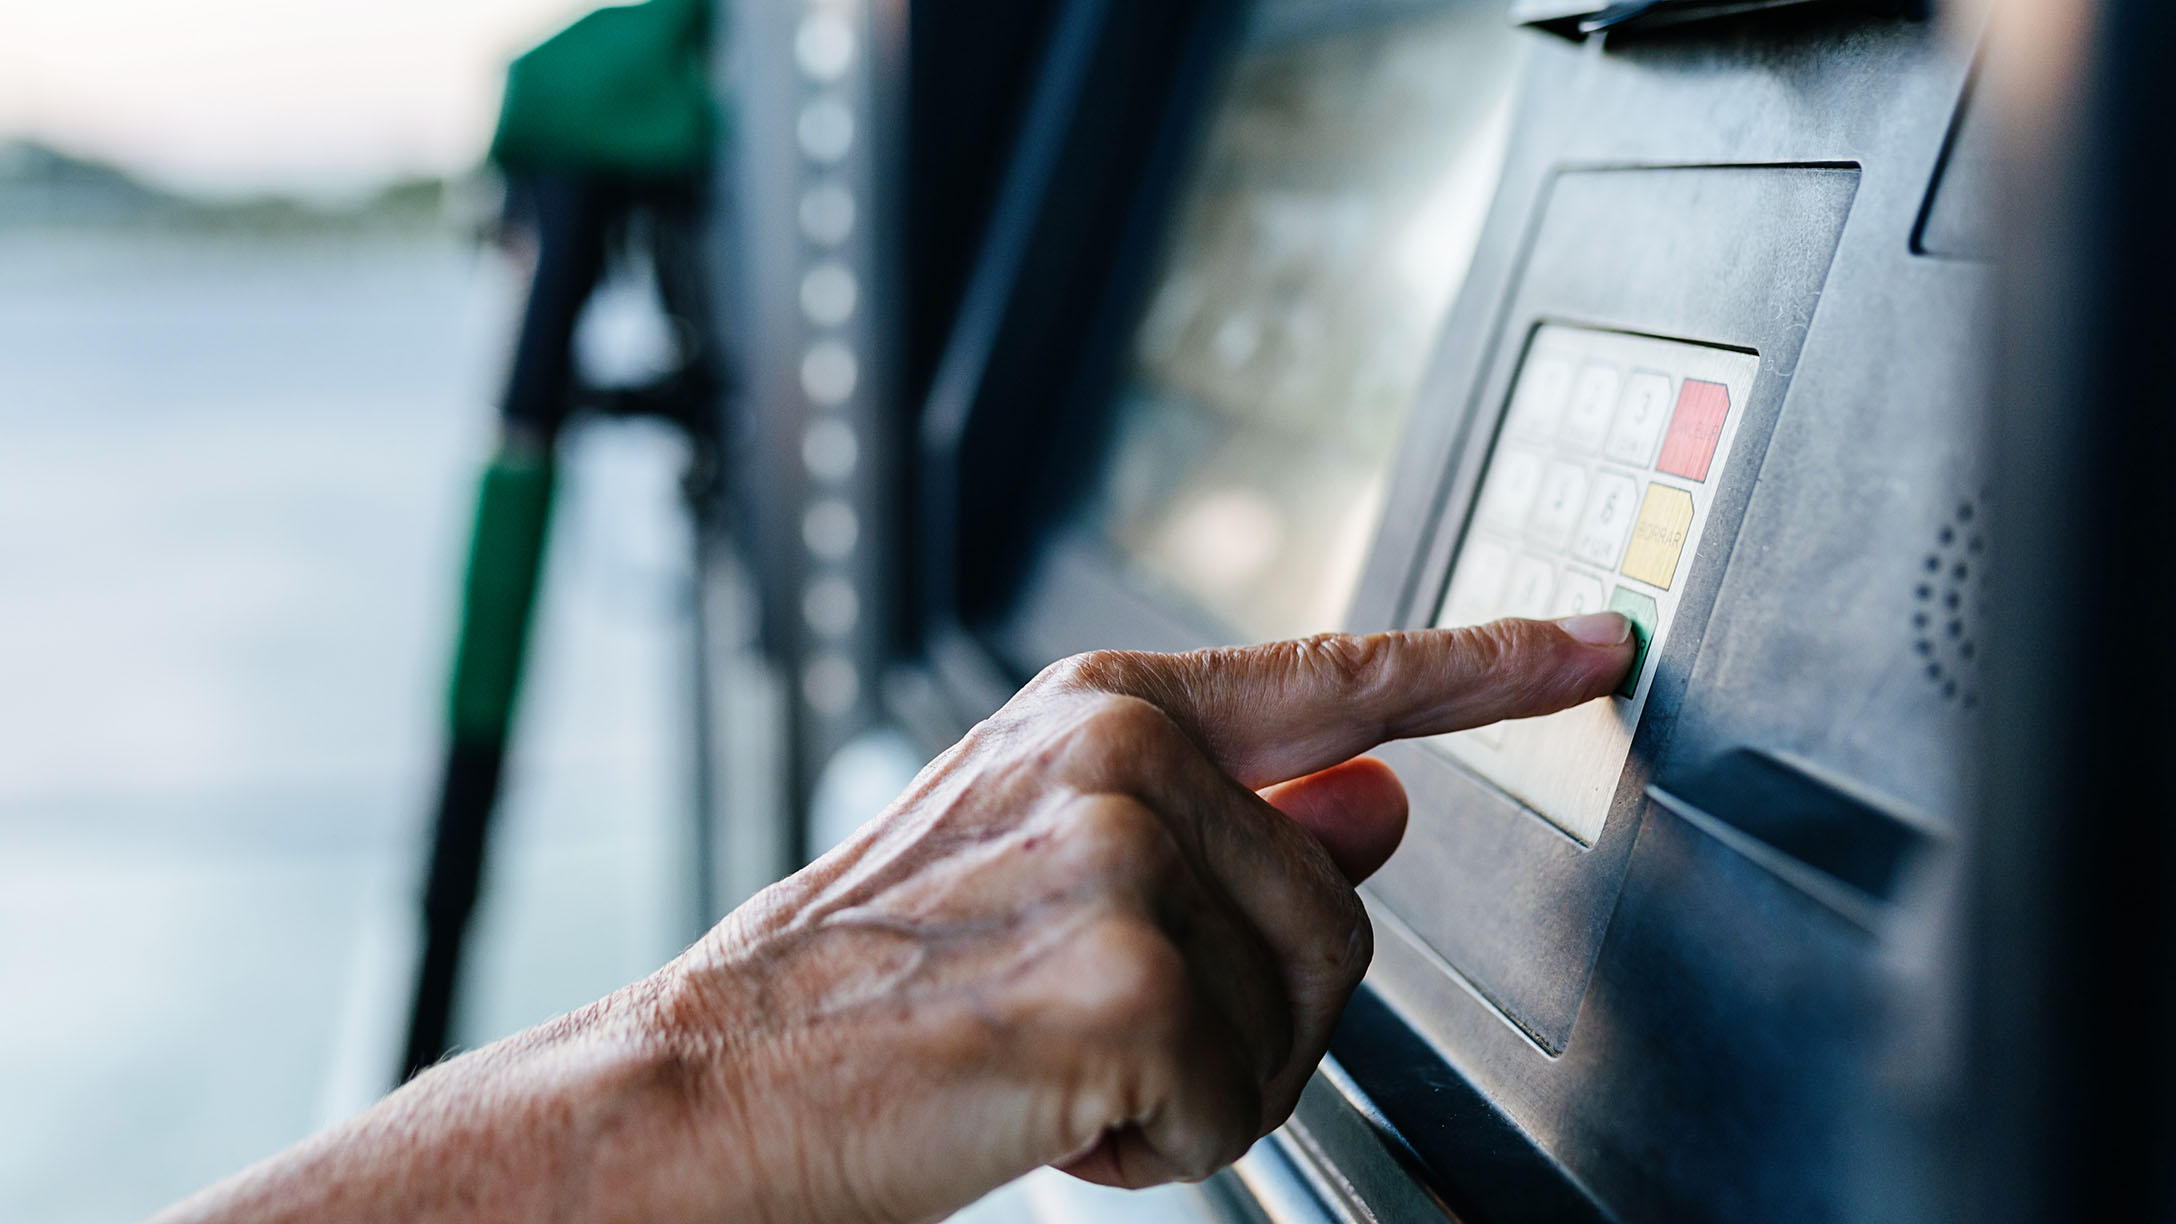 A hand punching in on the fuel kiosk